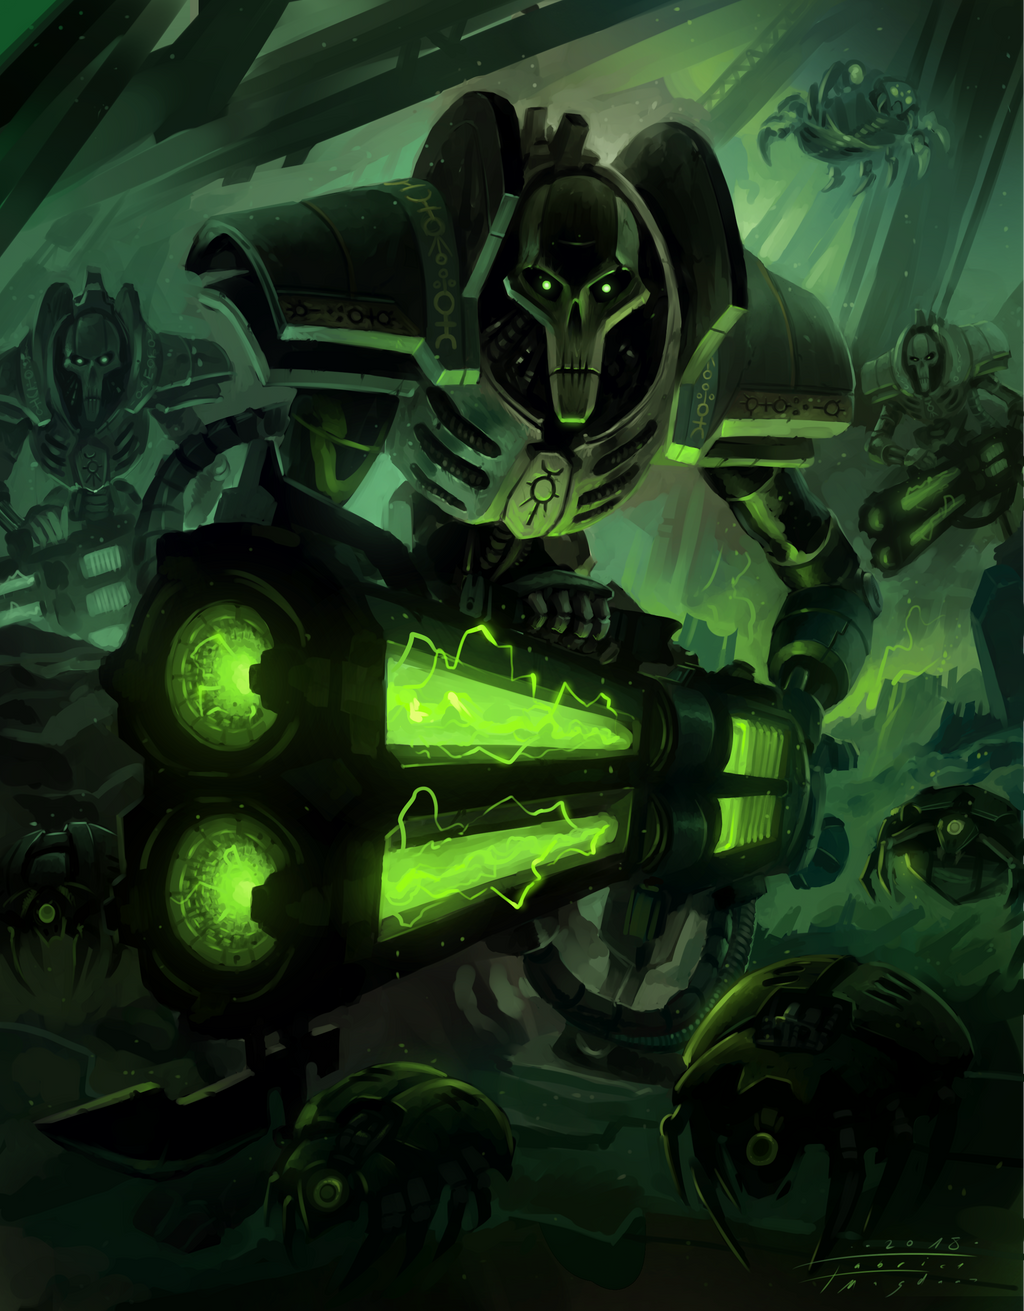 necrons_by_indofrece_dcda4xg-fullview.png